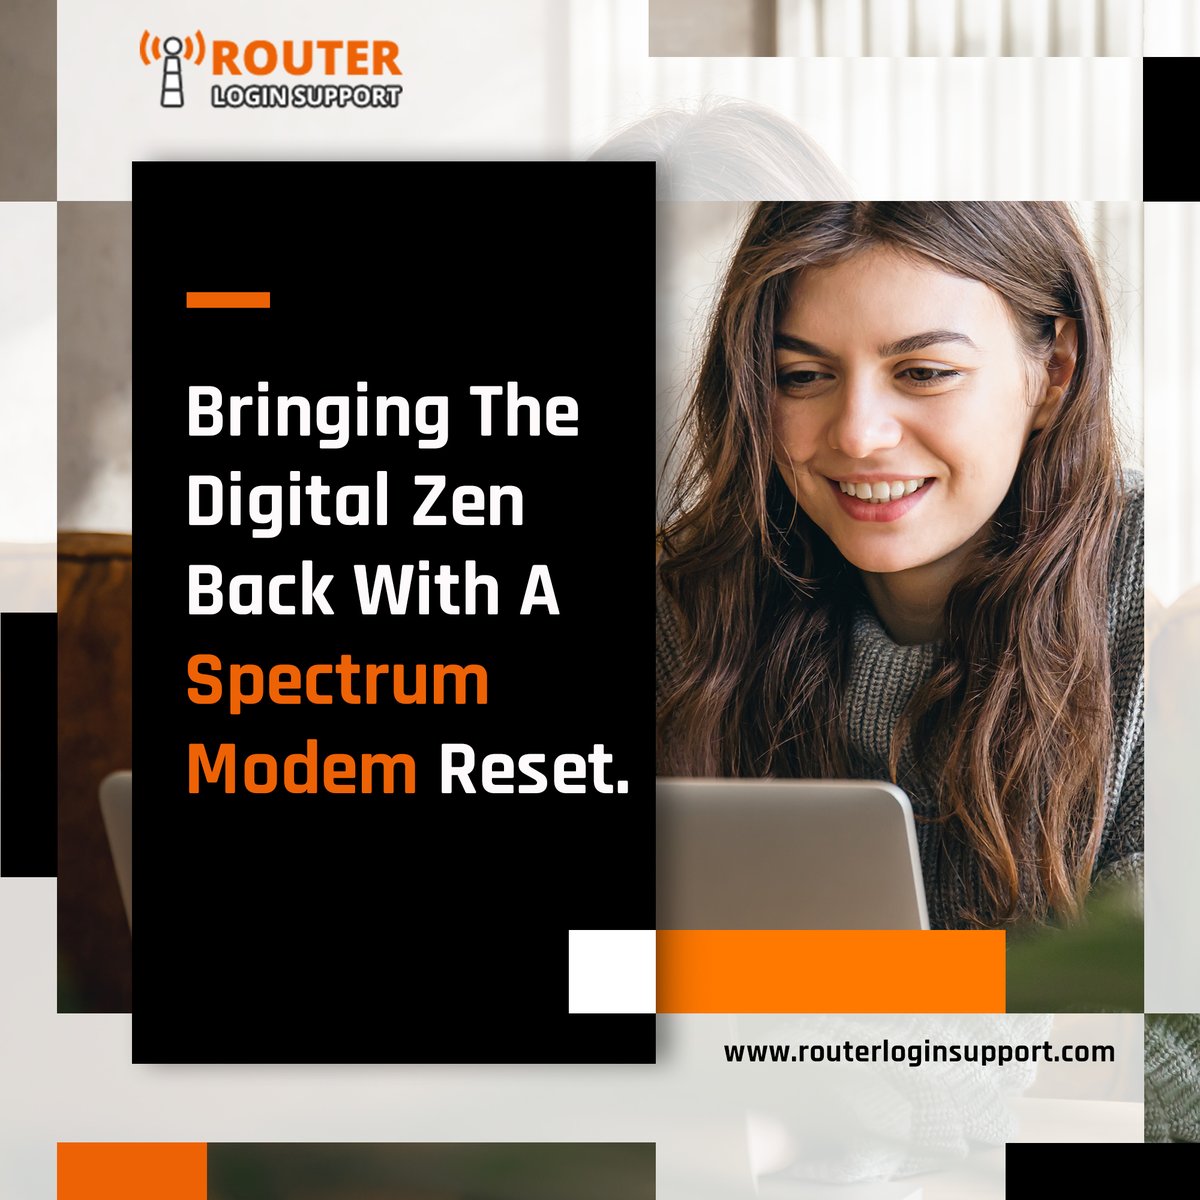 Count on optimal & high-speed performing spectrum modems, if you want to enjoy consistent & credible connection. 

#SpectrumFix #TechTips #TechHacks #StayConnected #TechLife #GadgetGuru #DigitalRevolution   #SpeedyInternet #TechFixes

bit.ly/3uYHrEo